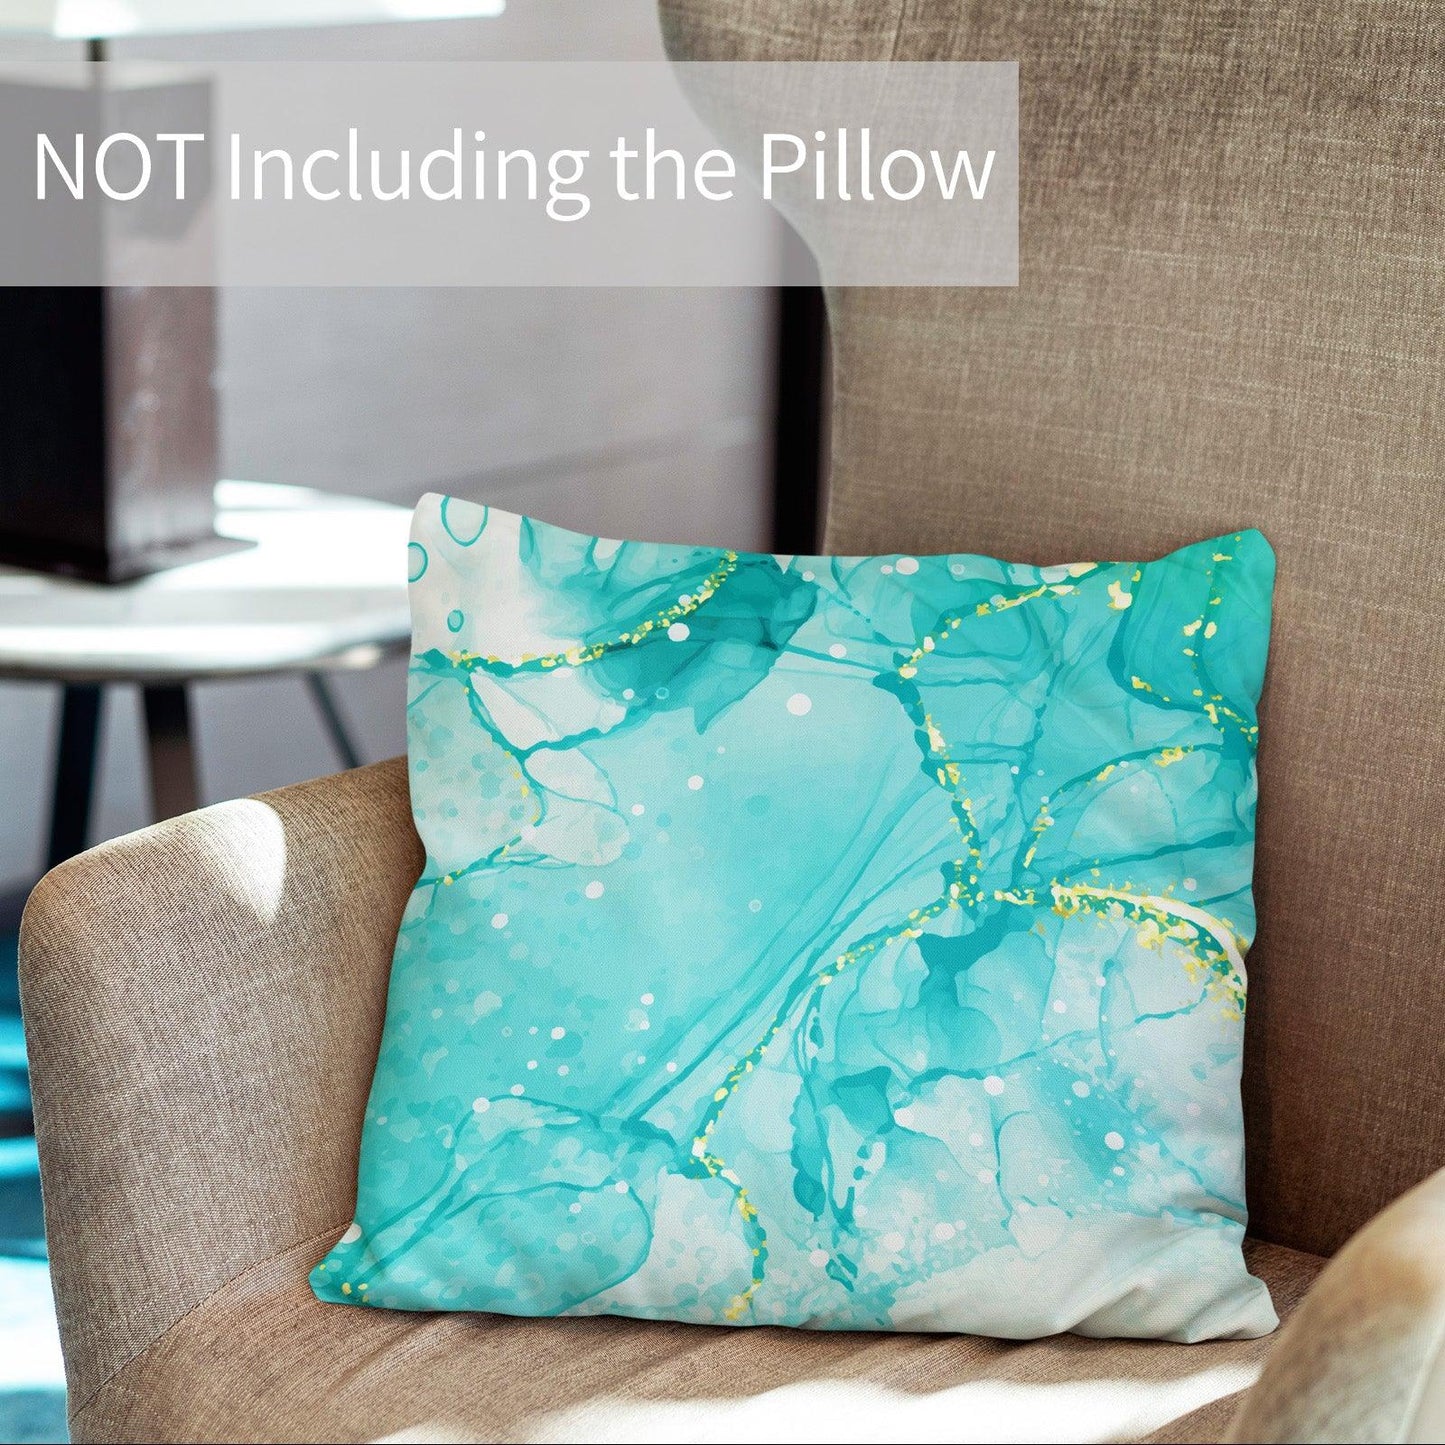 Marble Abstract Throw Pillow Covers Pack of 2 18x18 Inch (Cyan Mint) - Berkin Arts